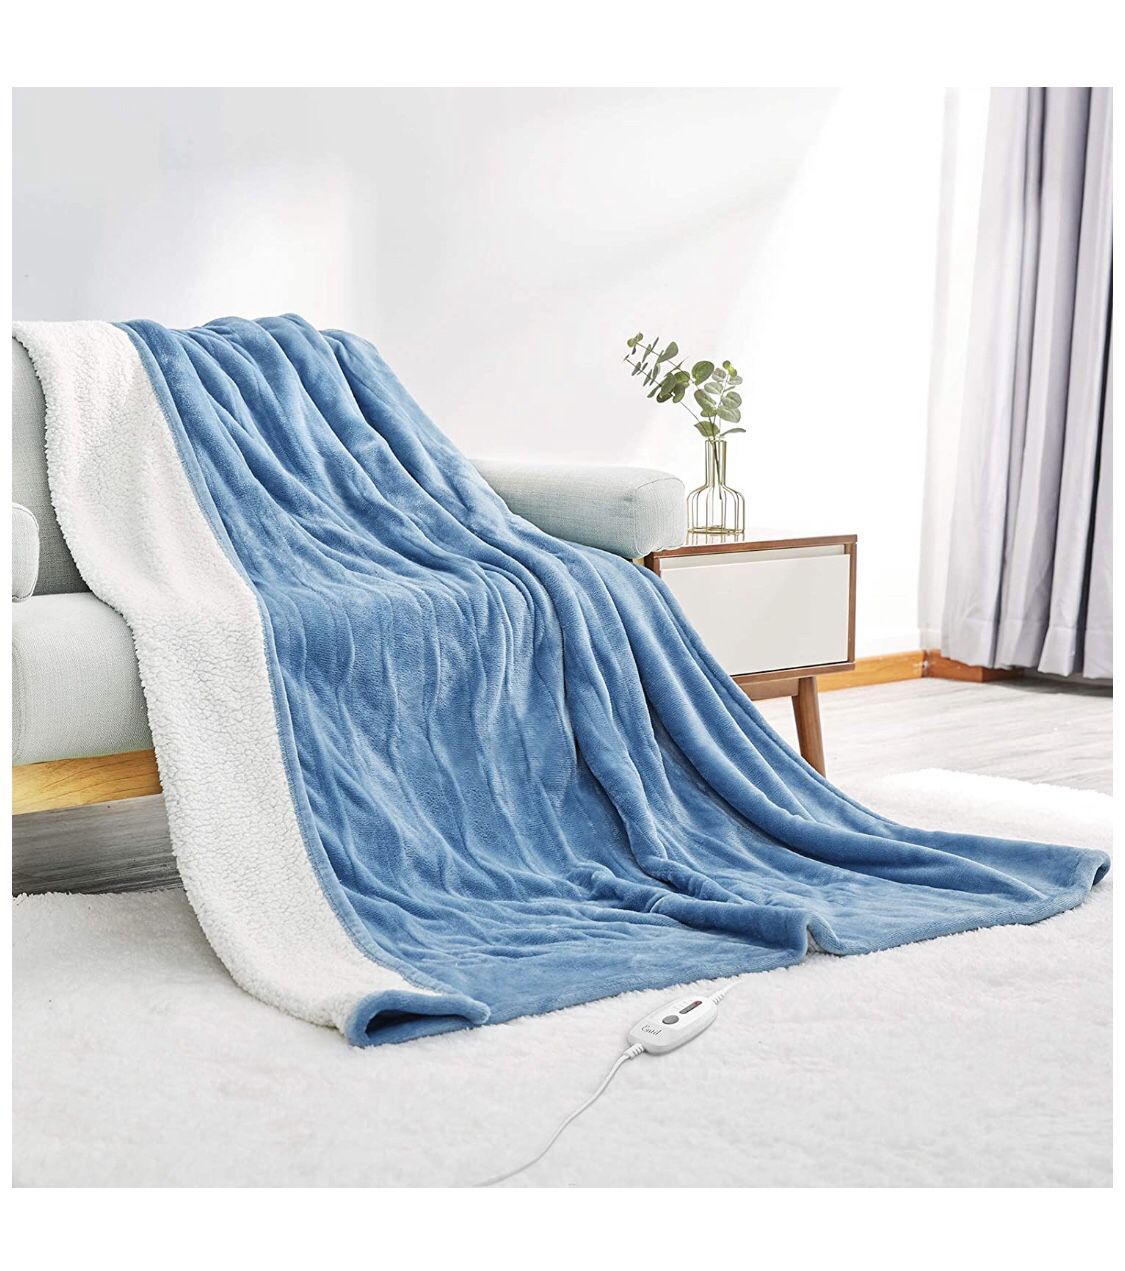 Electric Heated Blanket Twin Size 62"x 84" Flannel & Shu Velveteen Reversible, Fast Heating and for Full Body Warming with 10 Hours Auto Off & 4 Heat